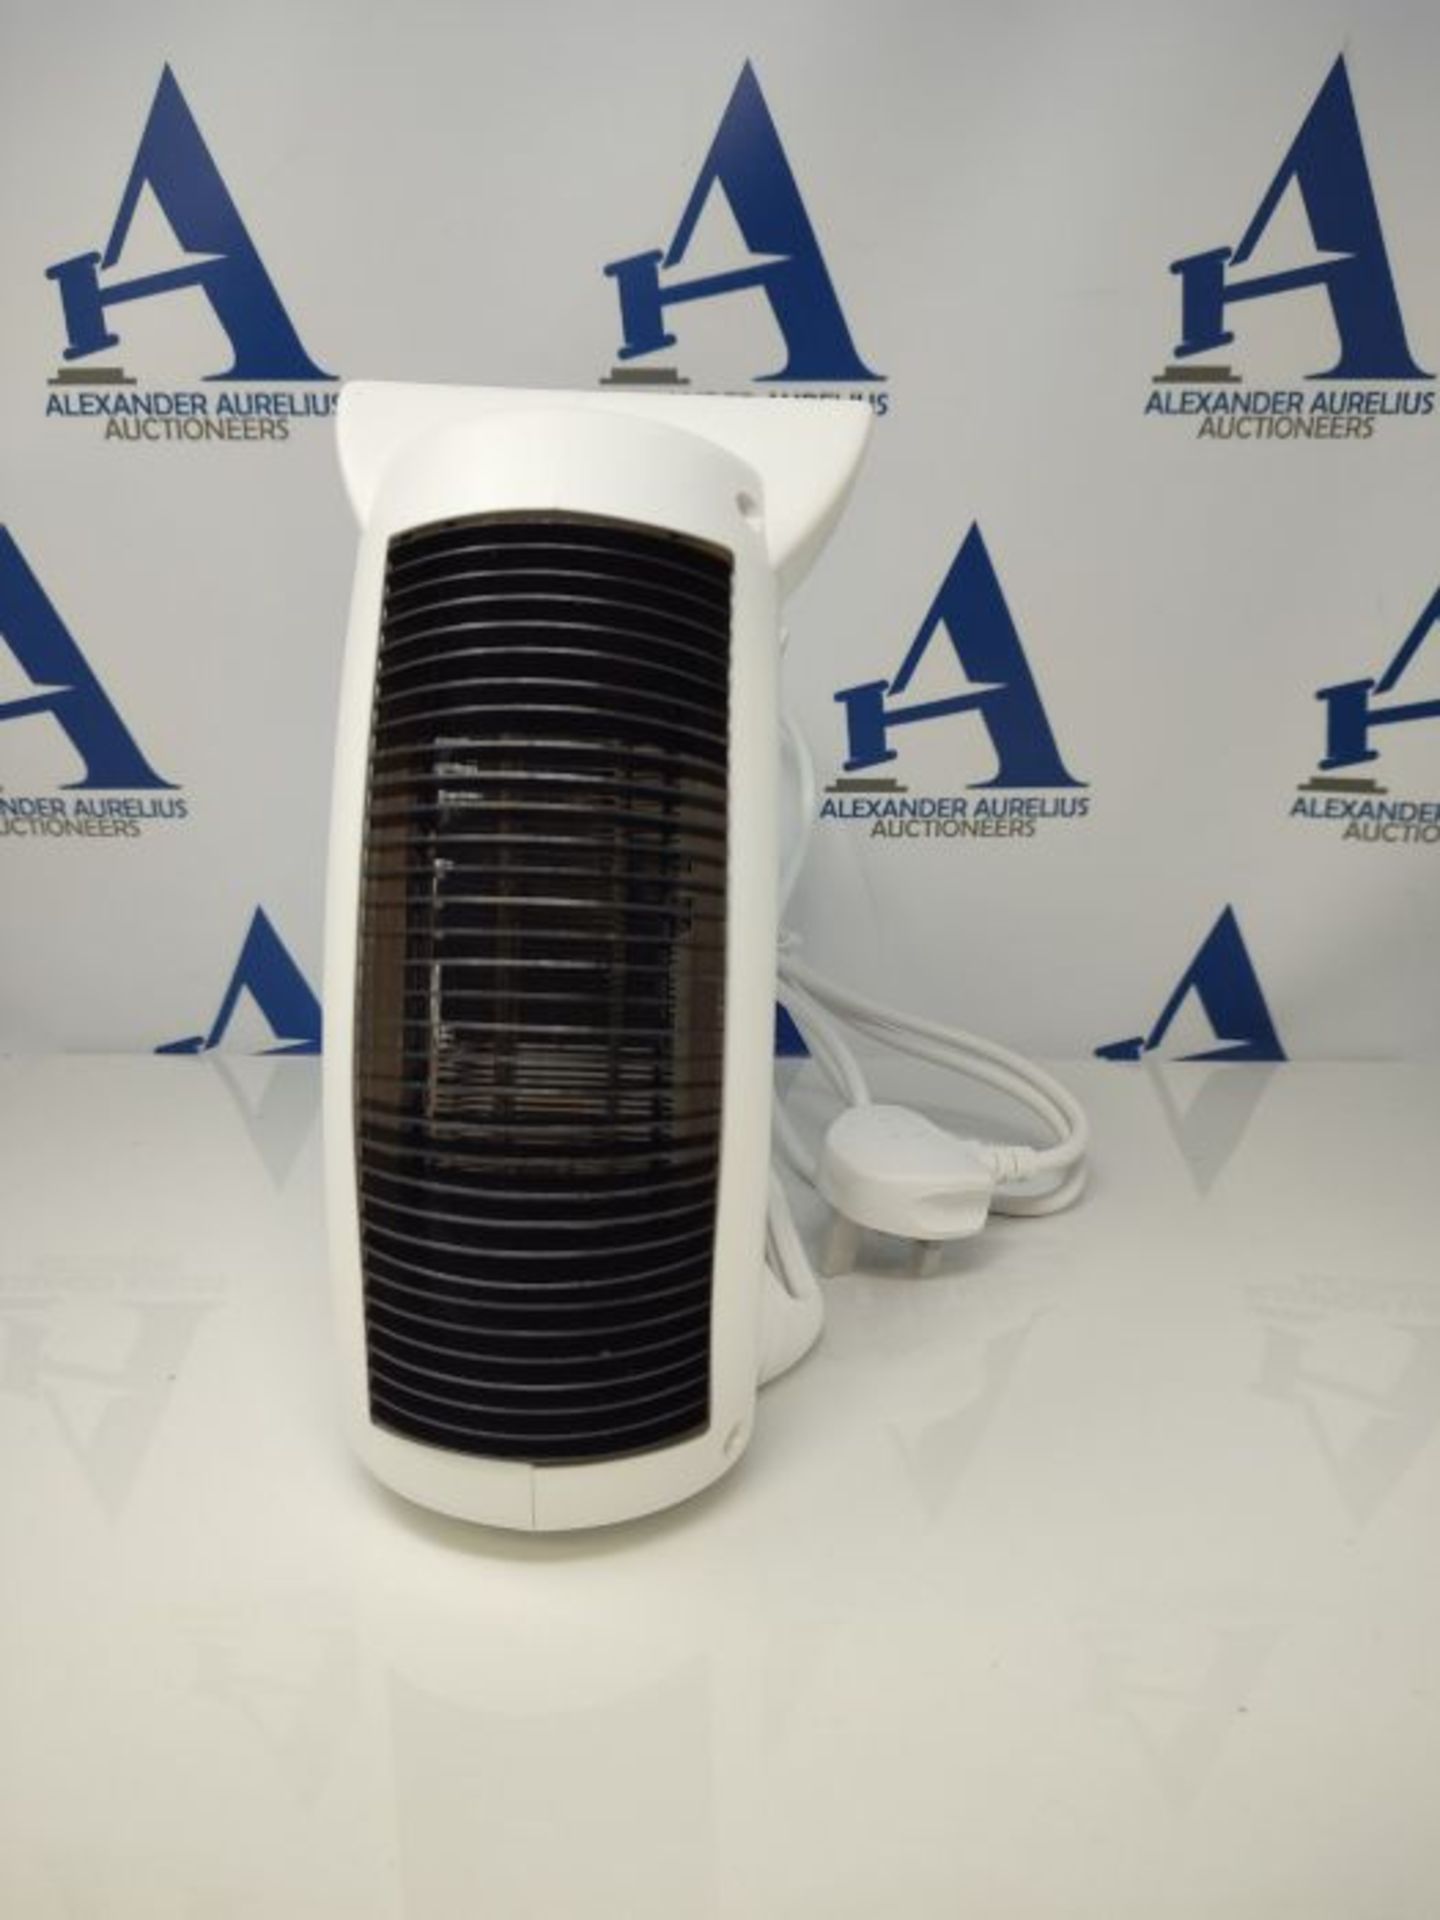 Warmlite WL44001 Thermo Fan Heater with 2 Heat Settings and Overheat Protection, 2000W - Image 3 of 3